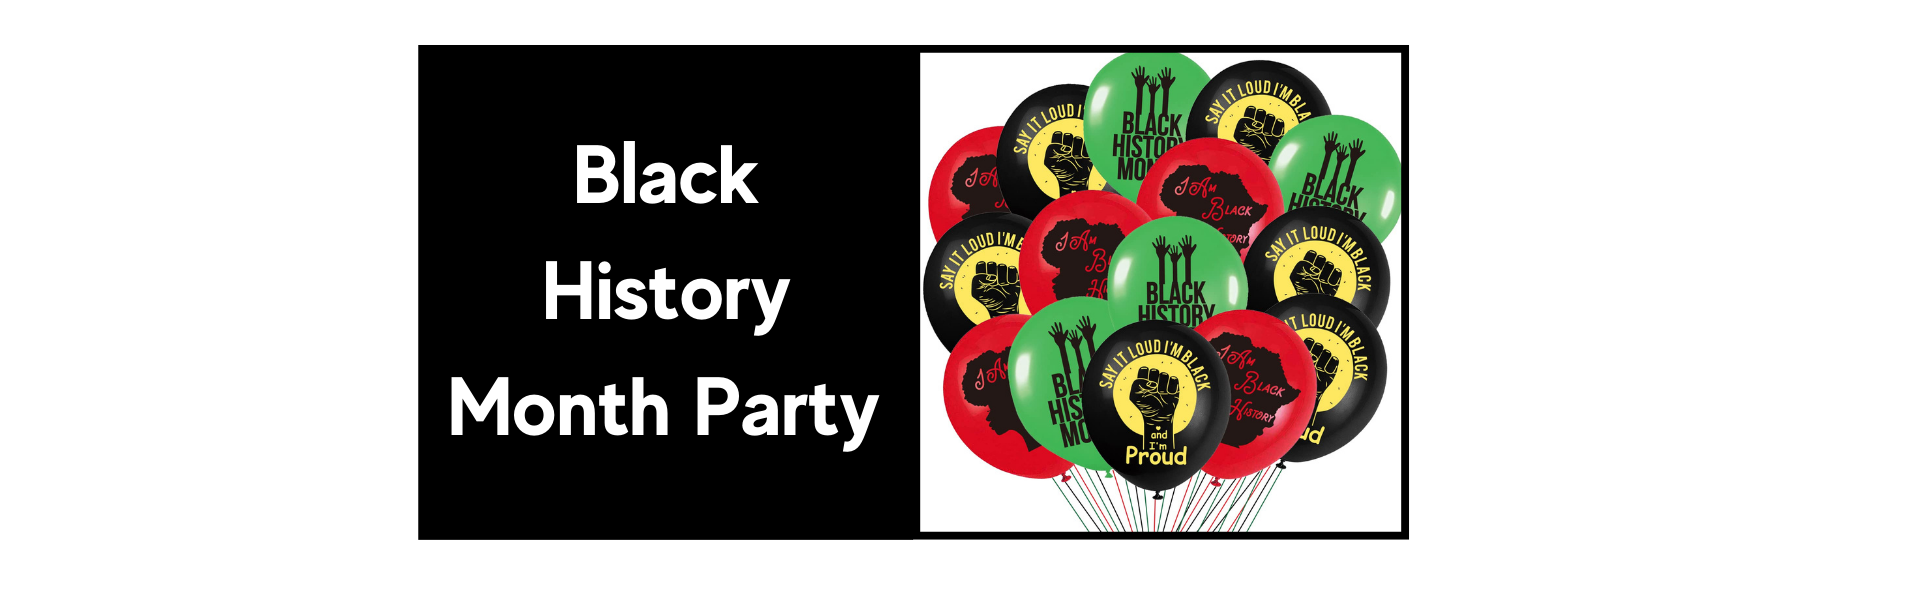 Black-History-Month-Party.png